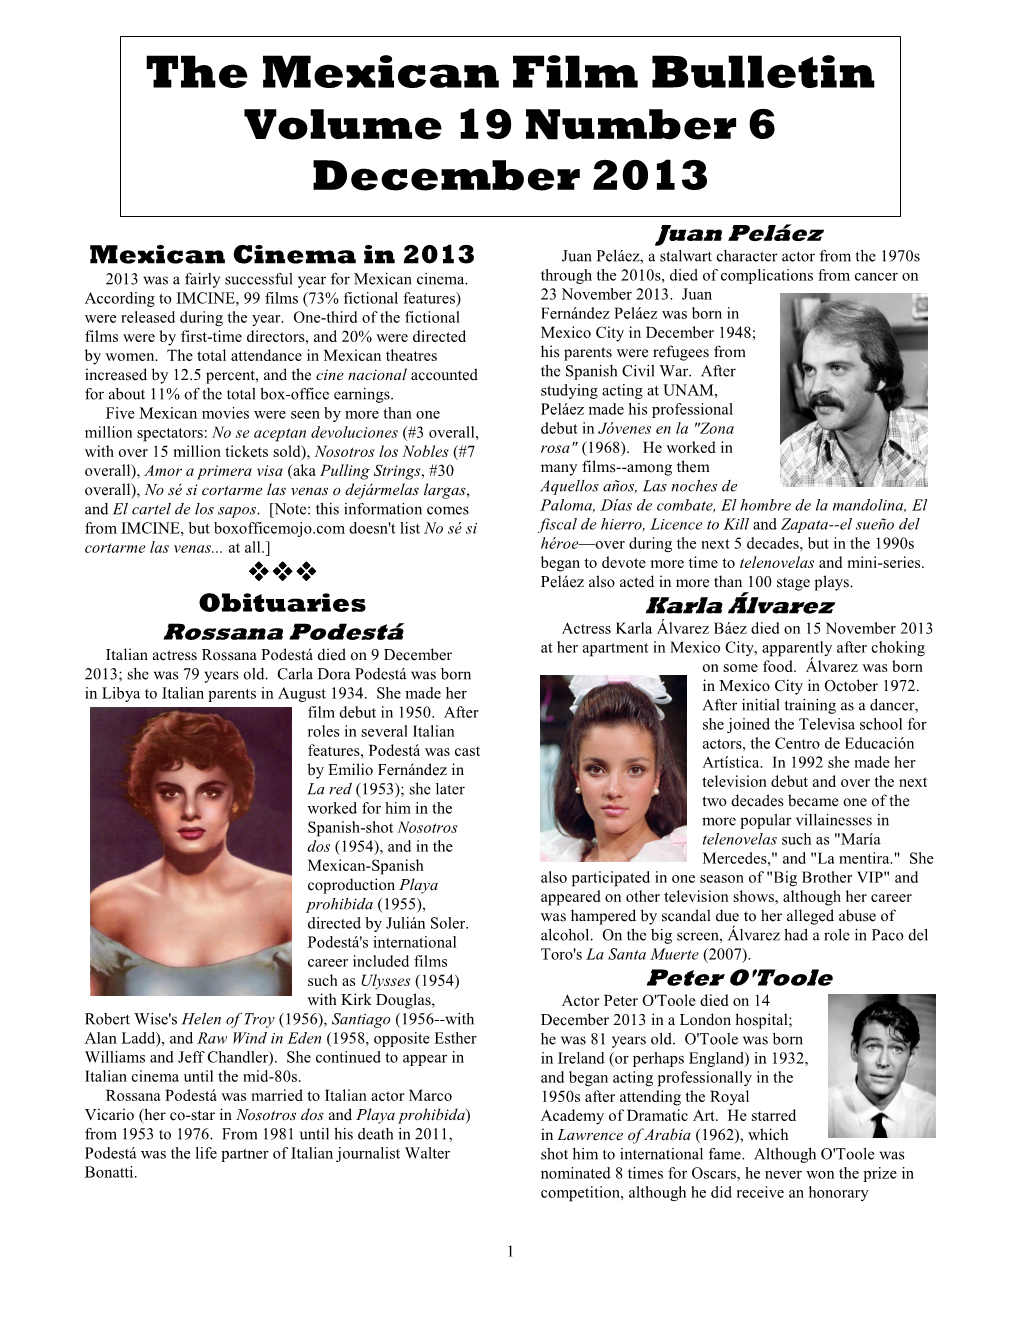 THE MEXICAN FILM BULLETIN Volume 19 Number 6 (December 2013) the Mexican Film Bulletin